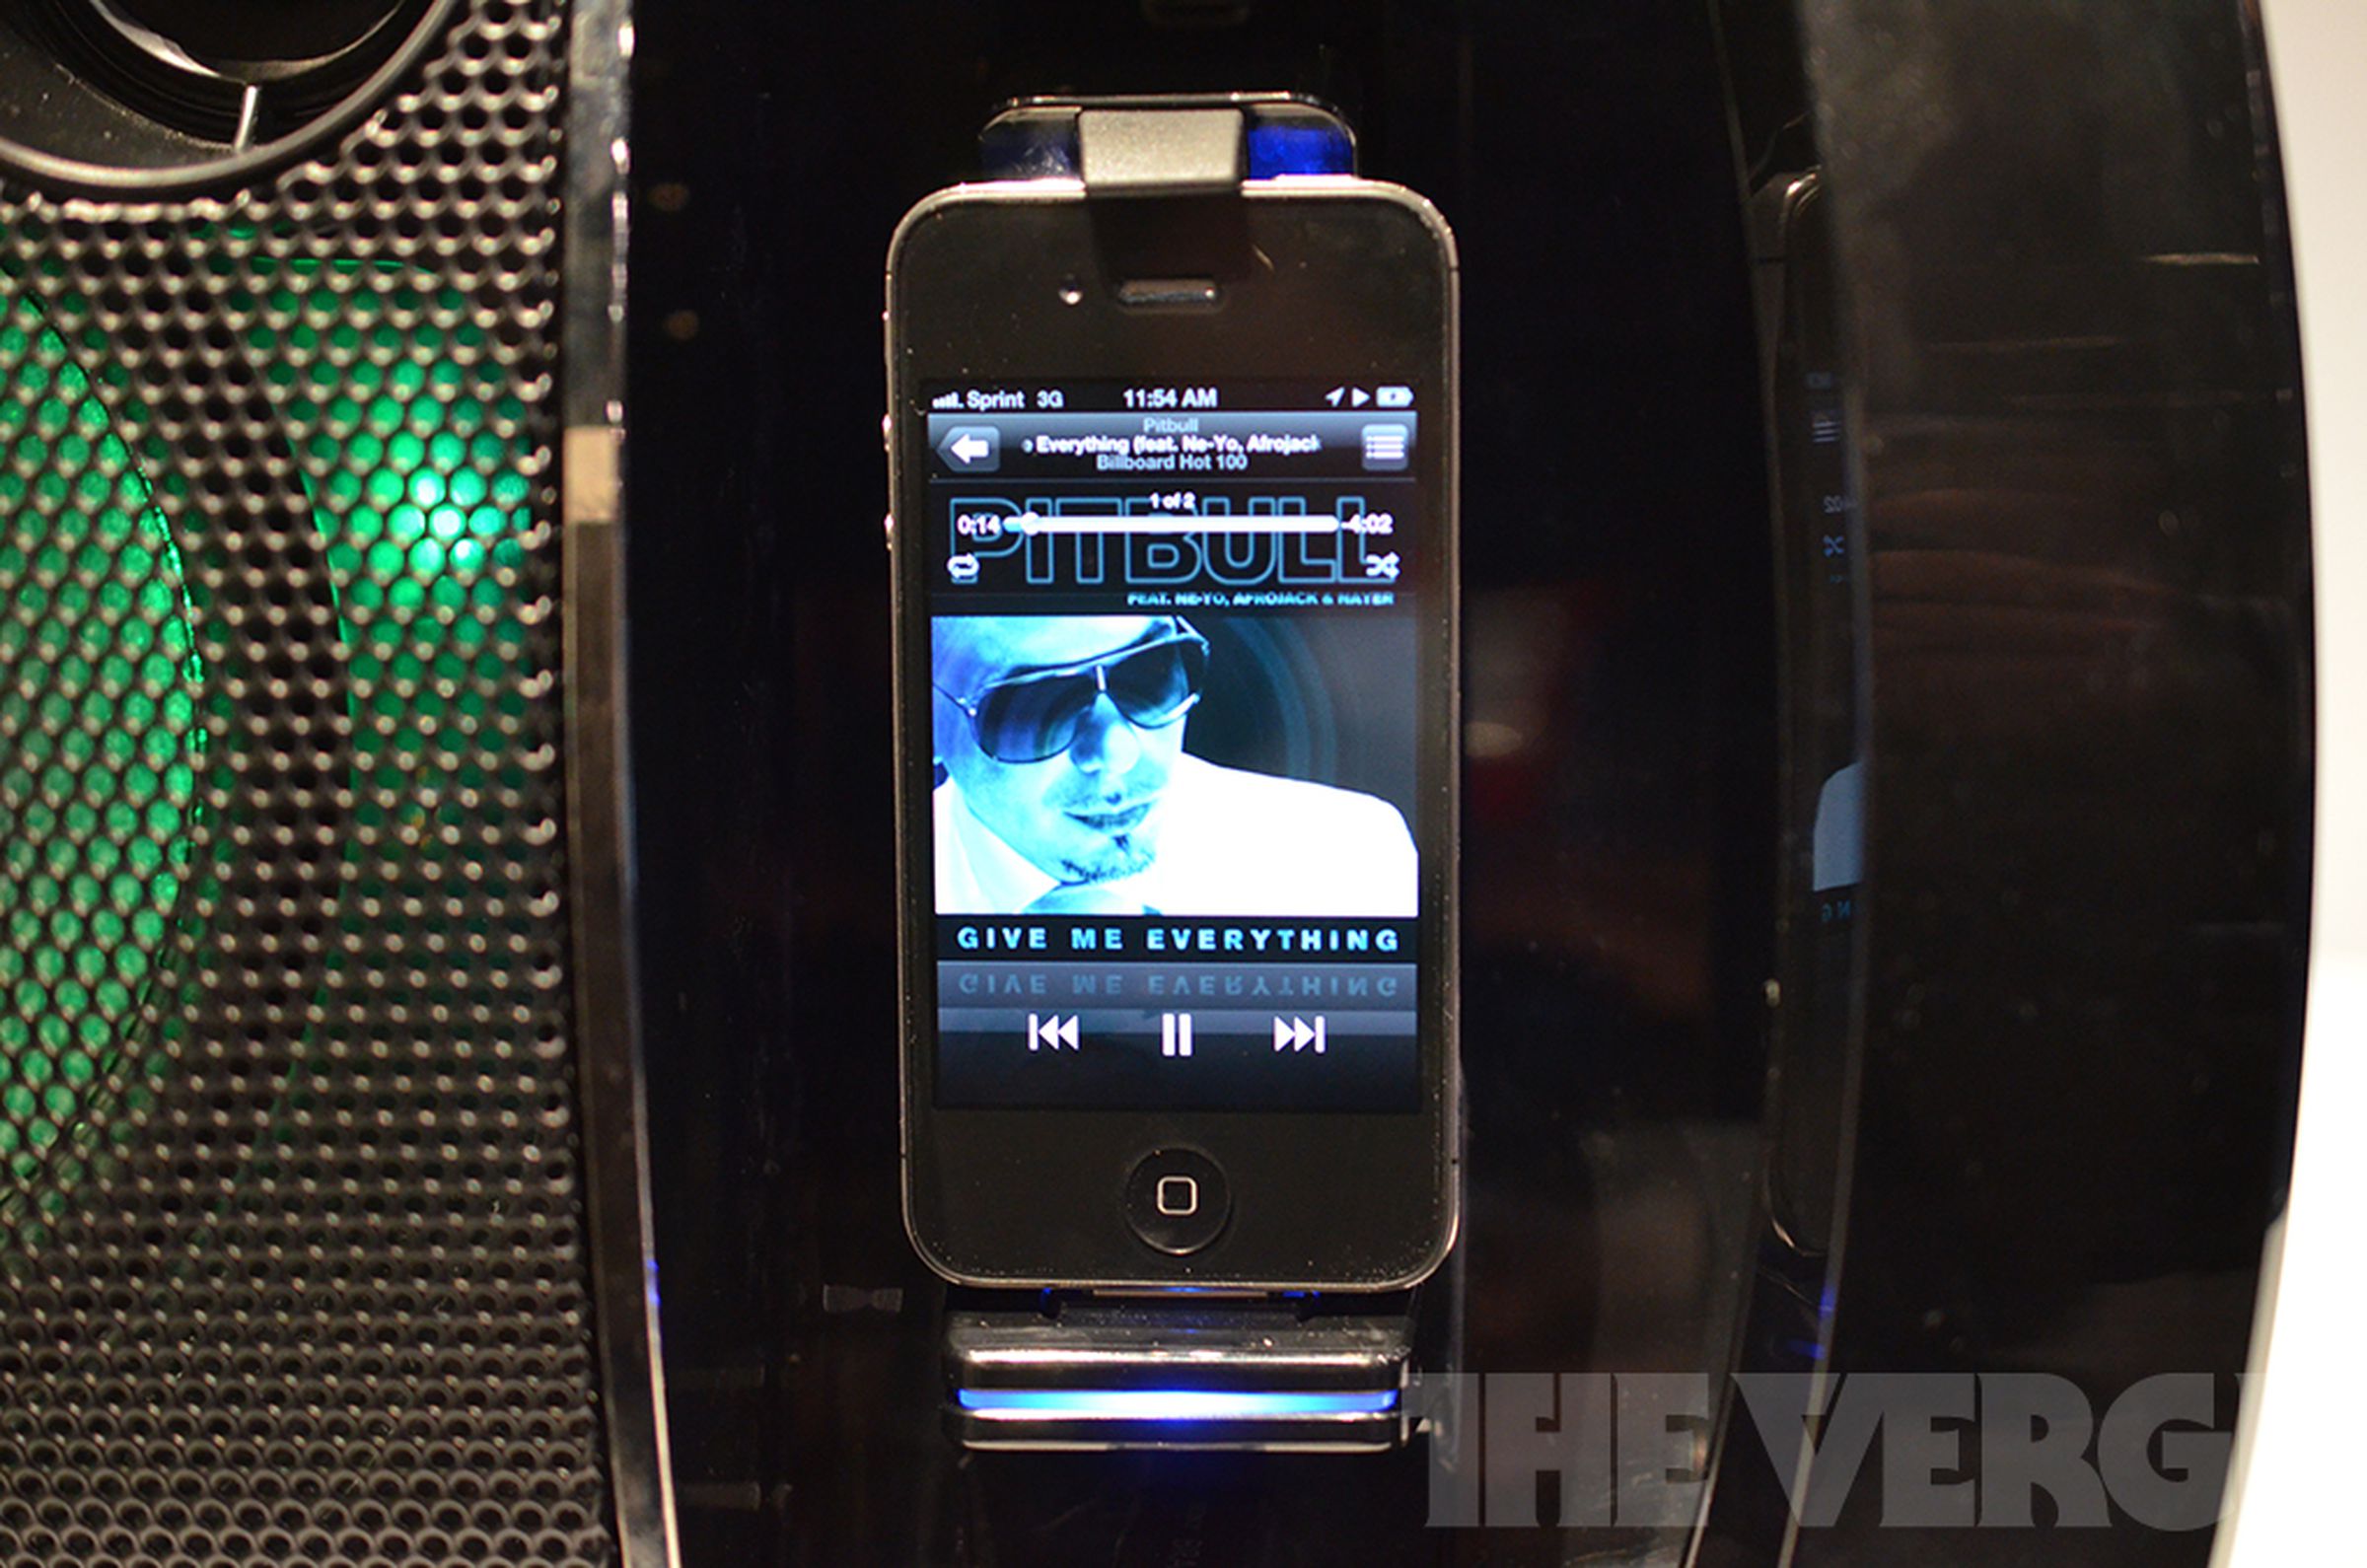 Sony RDH-GTK33iP iPod and iPhone dock hands-on photos